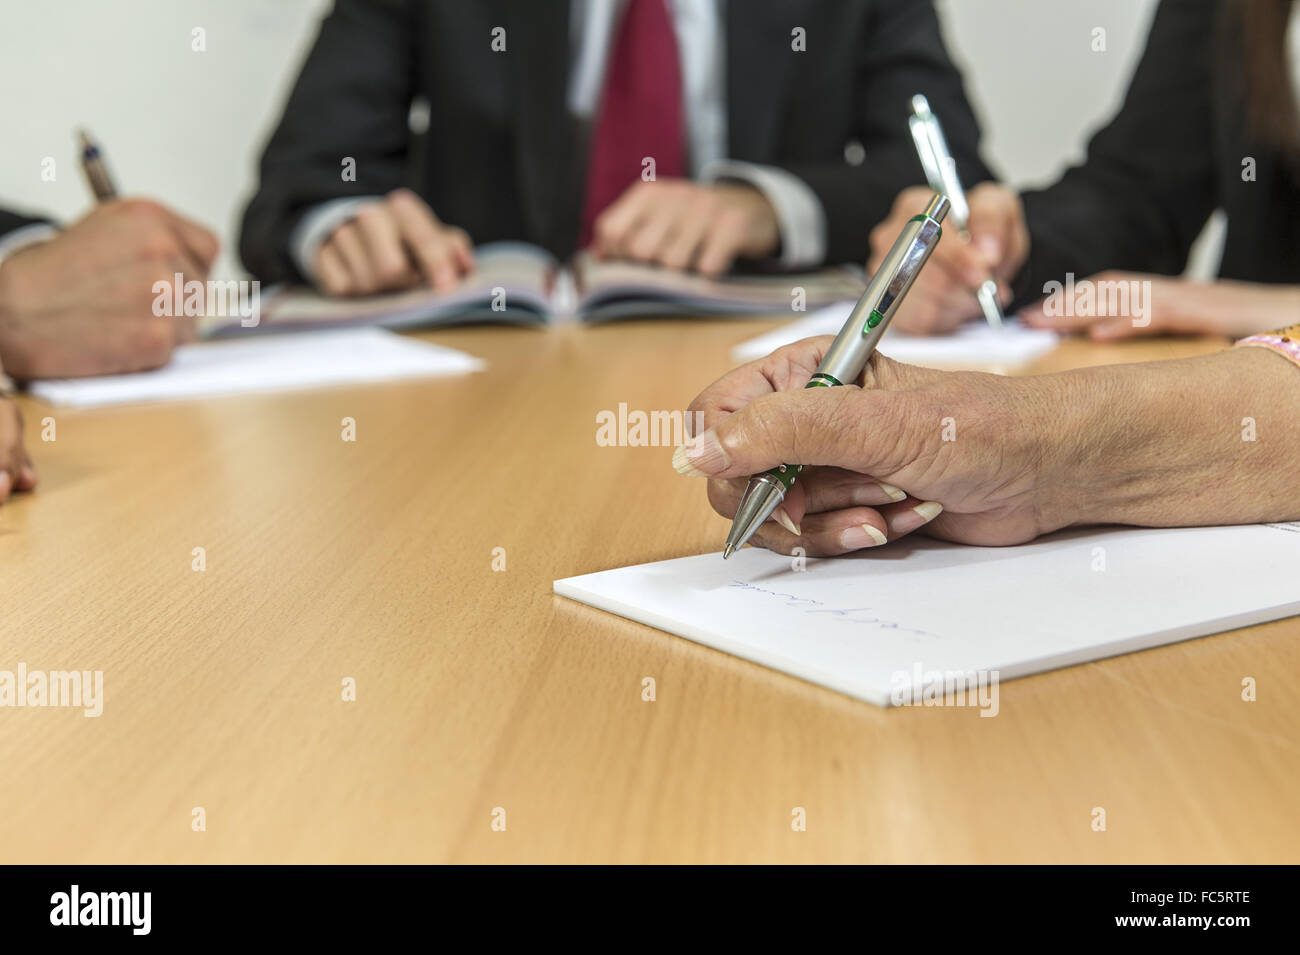 Hands with pen on a desk Stock Photo